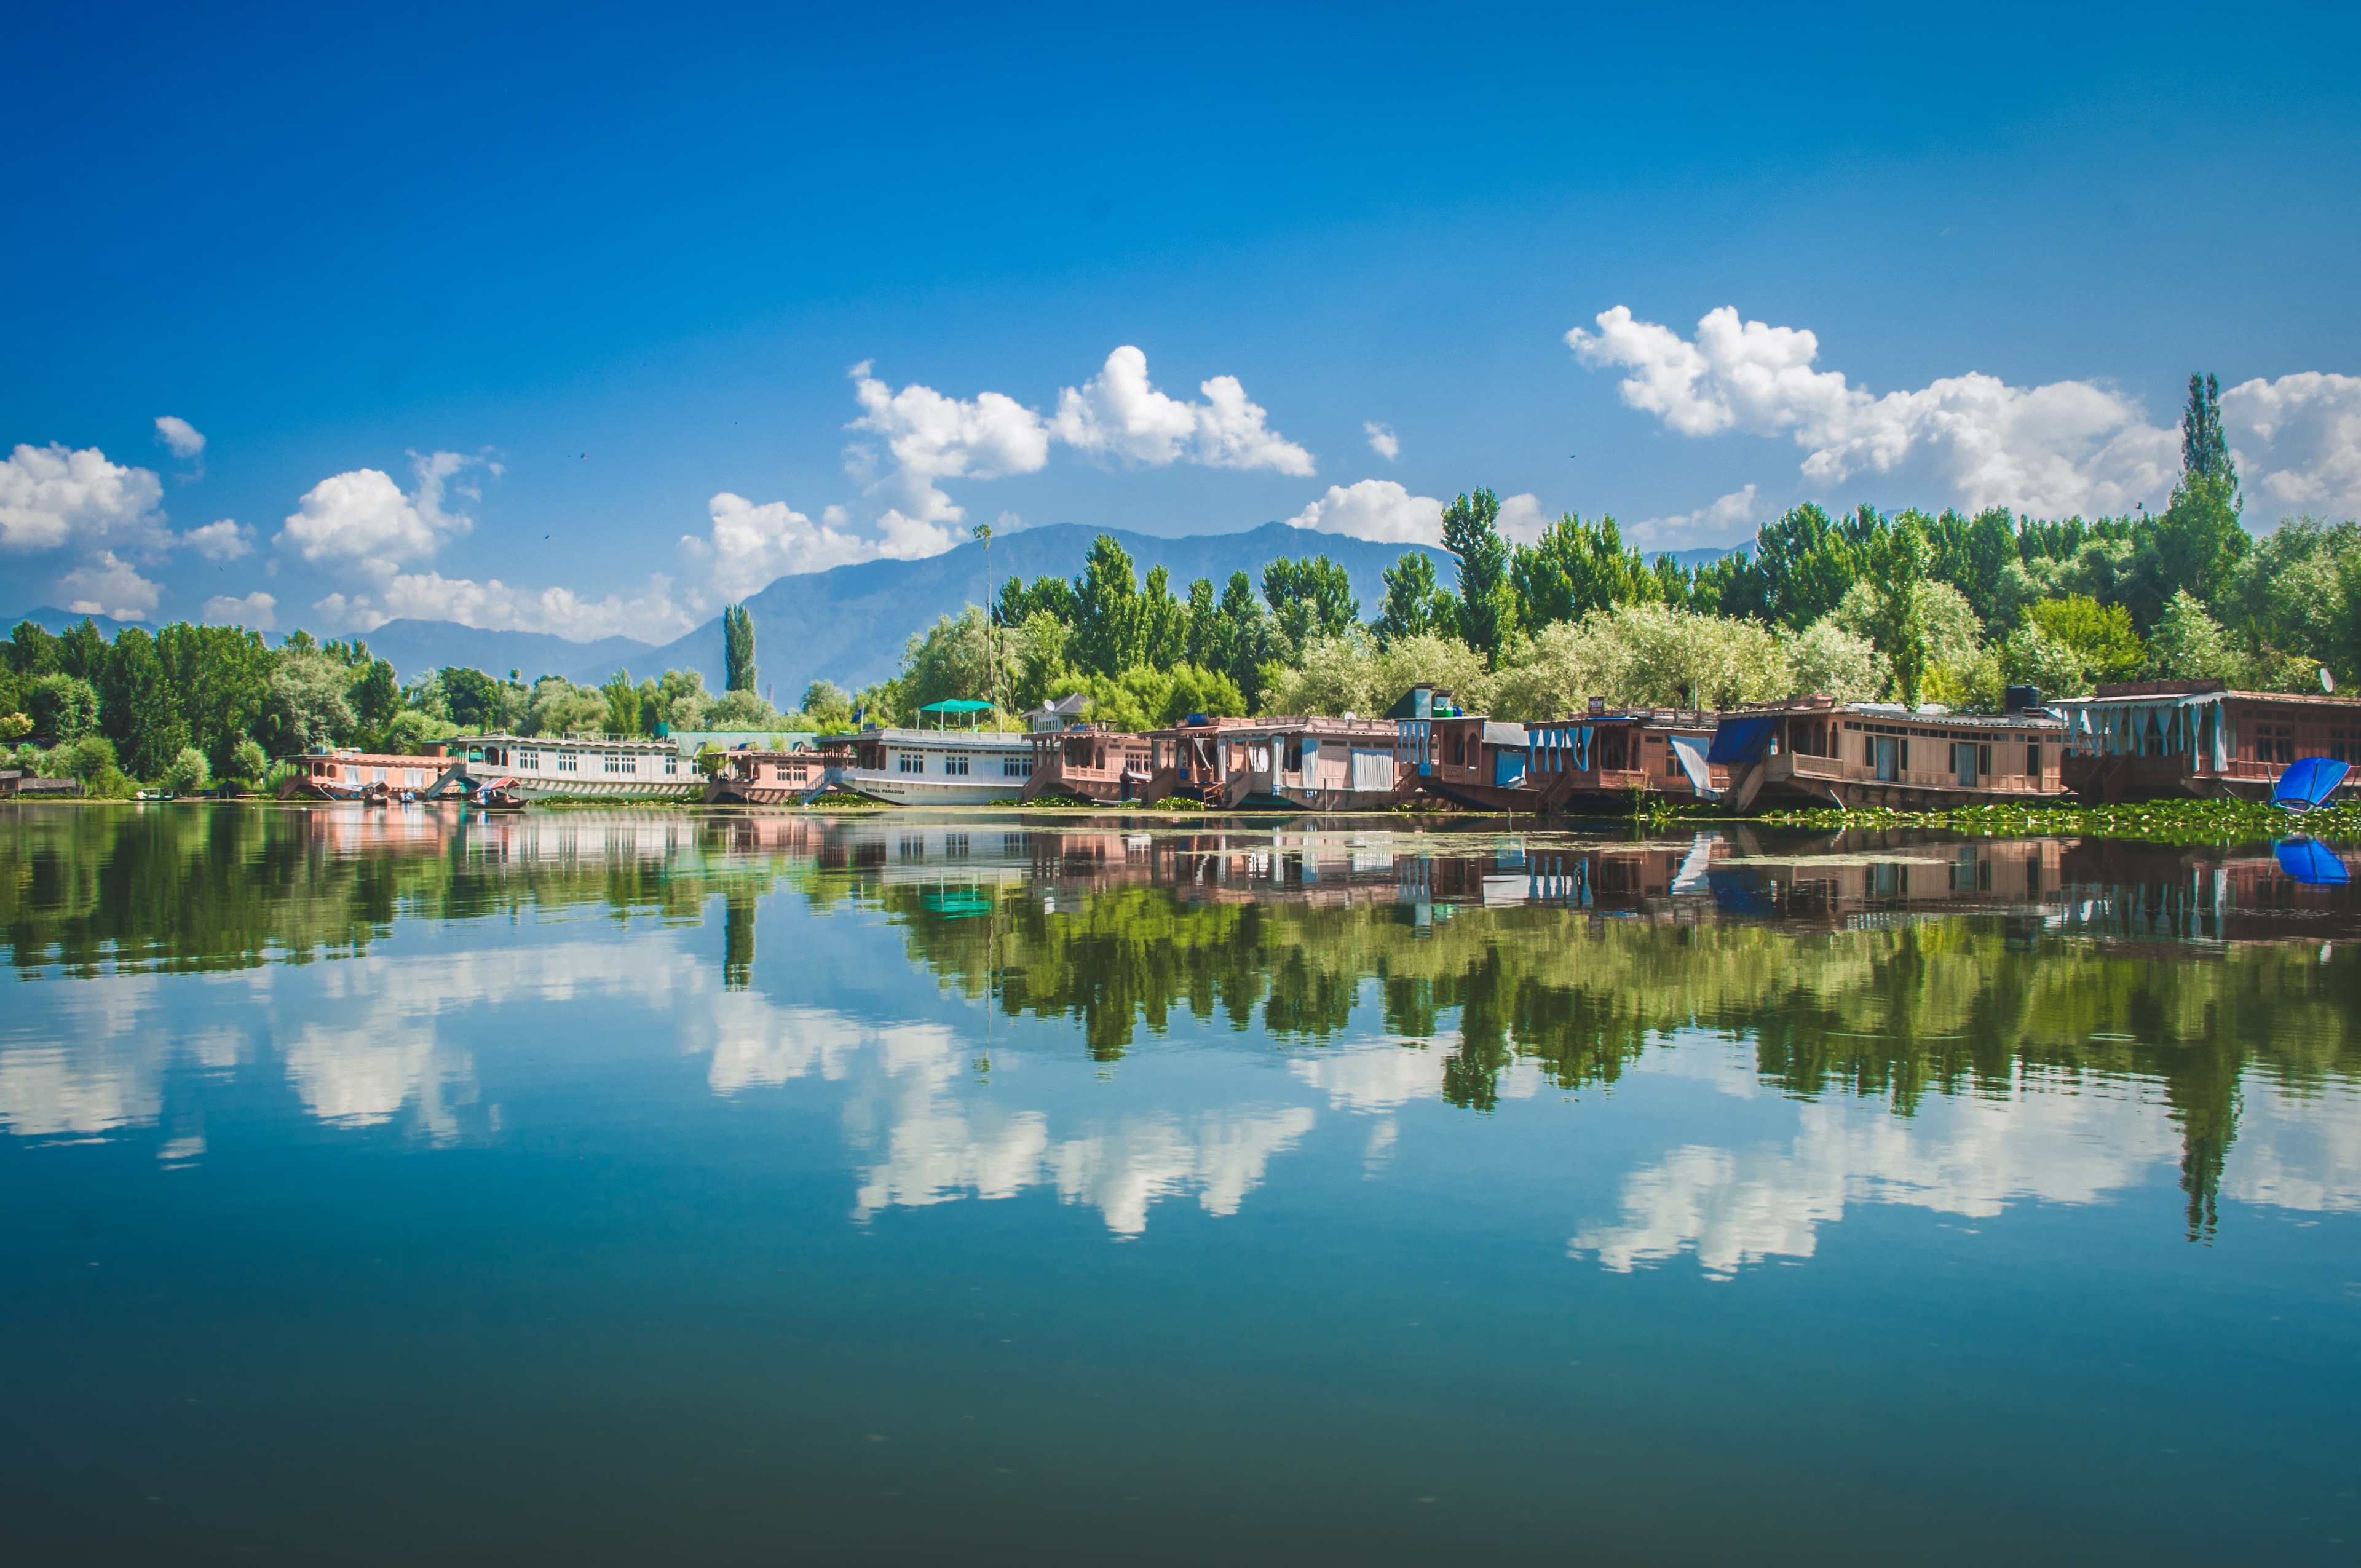 How to Make Your Autumn Vacation in Kashmir Memorable - A Guide